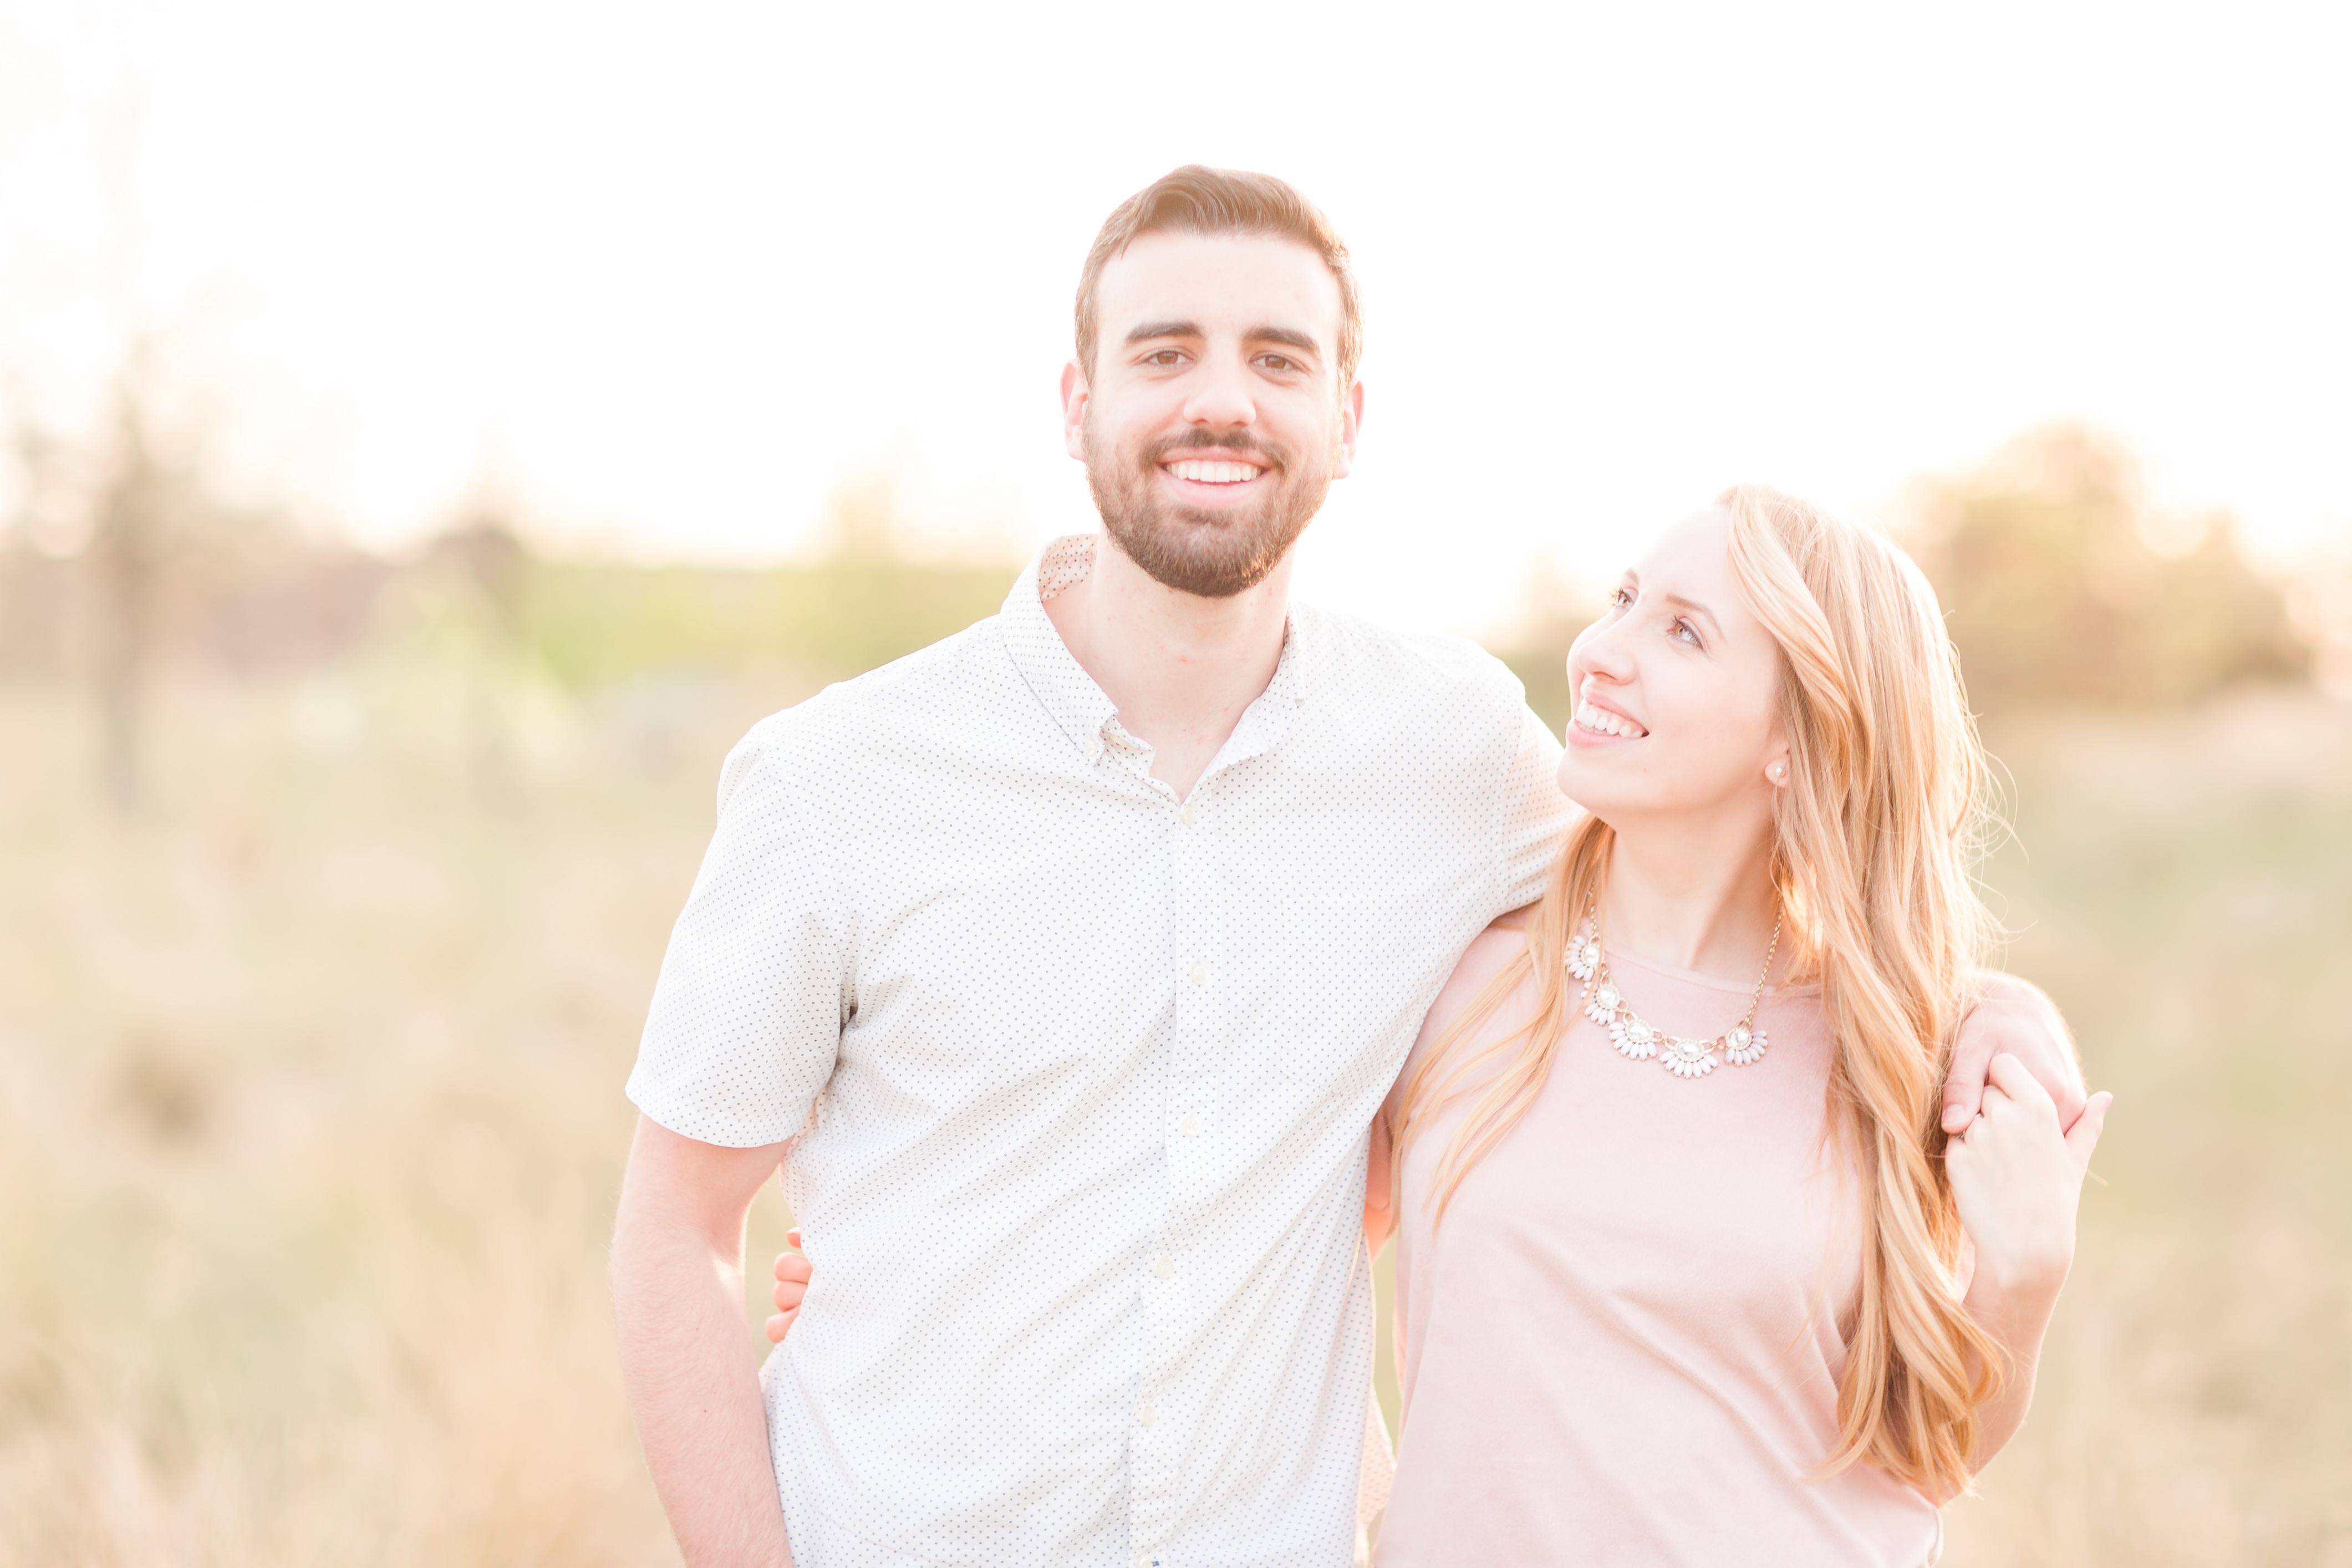 Wedding Photographers in Birmingham, Alabama Katie & Alec Photography | 10 Things We Love About Marriage